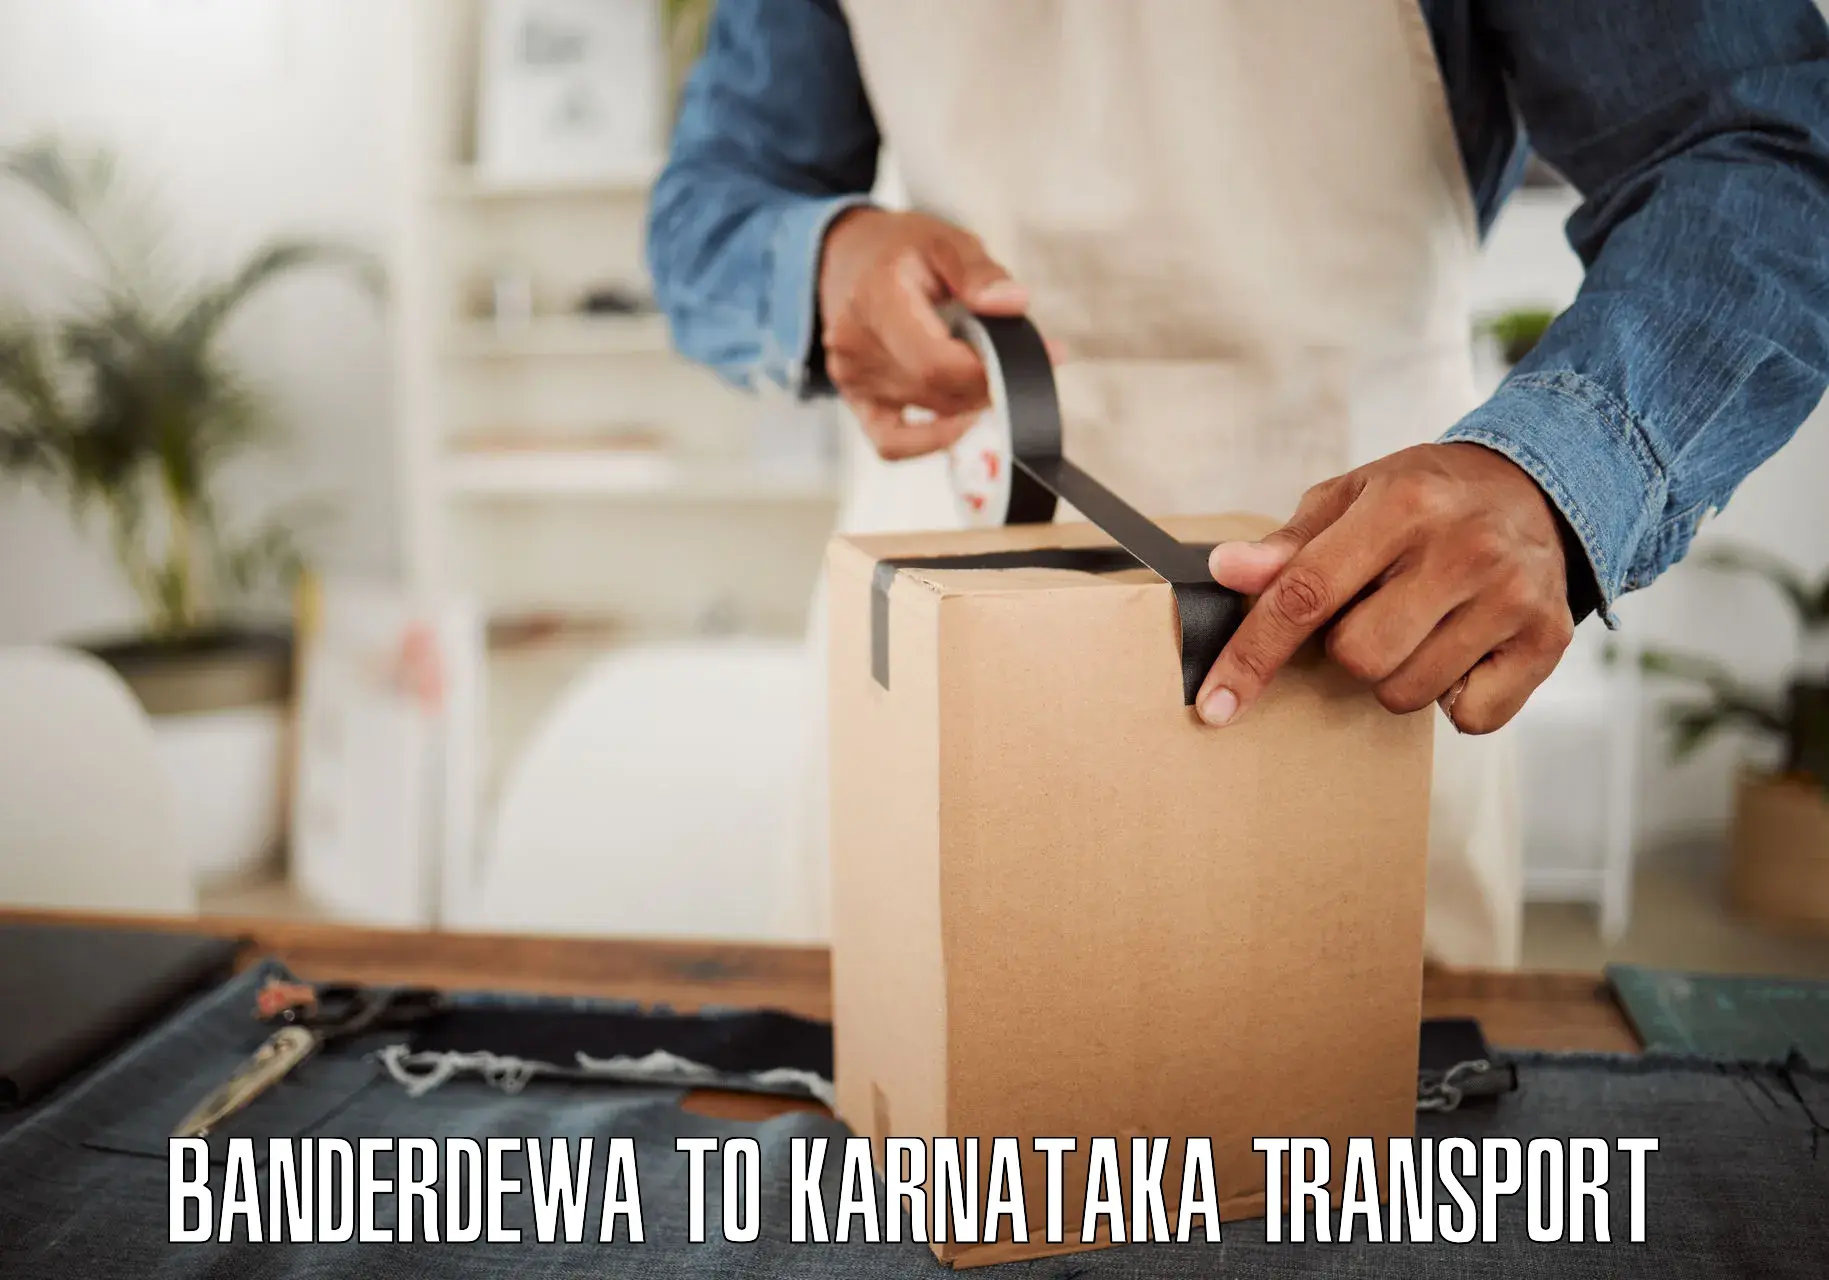 Transport bike from one state to another Banderdewa to Shorapur